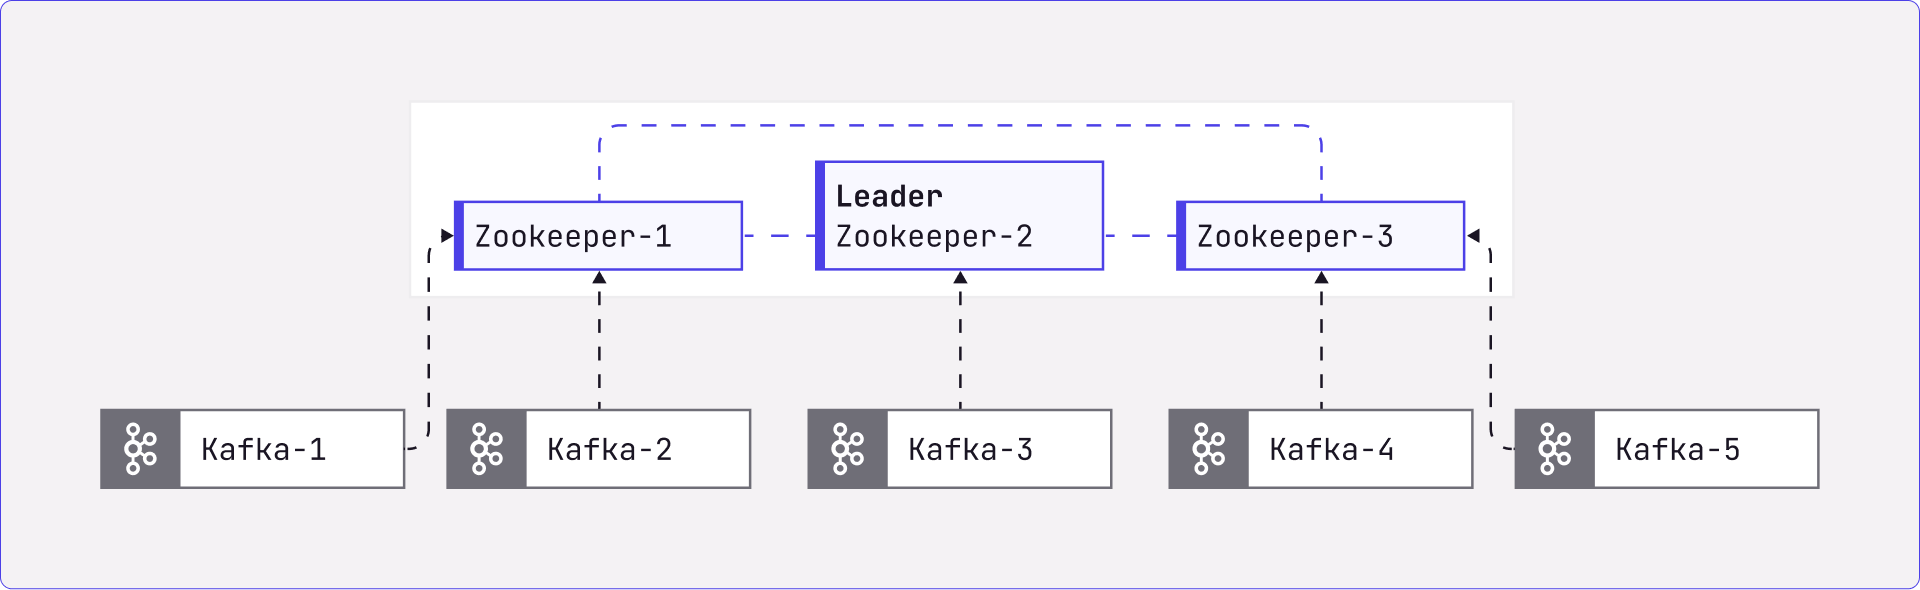 WhatIsZookeeper